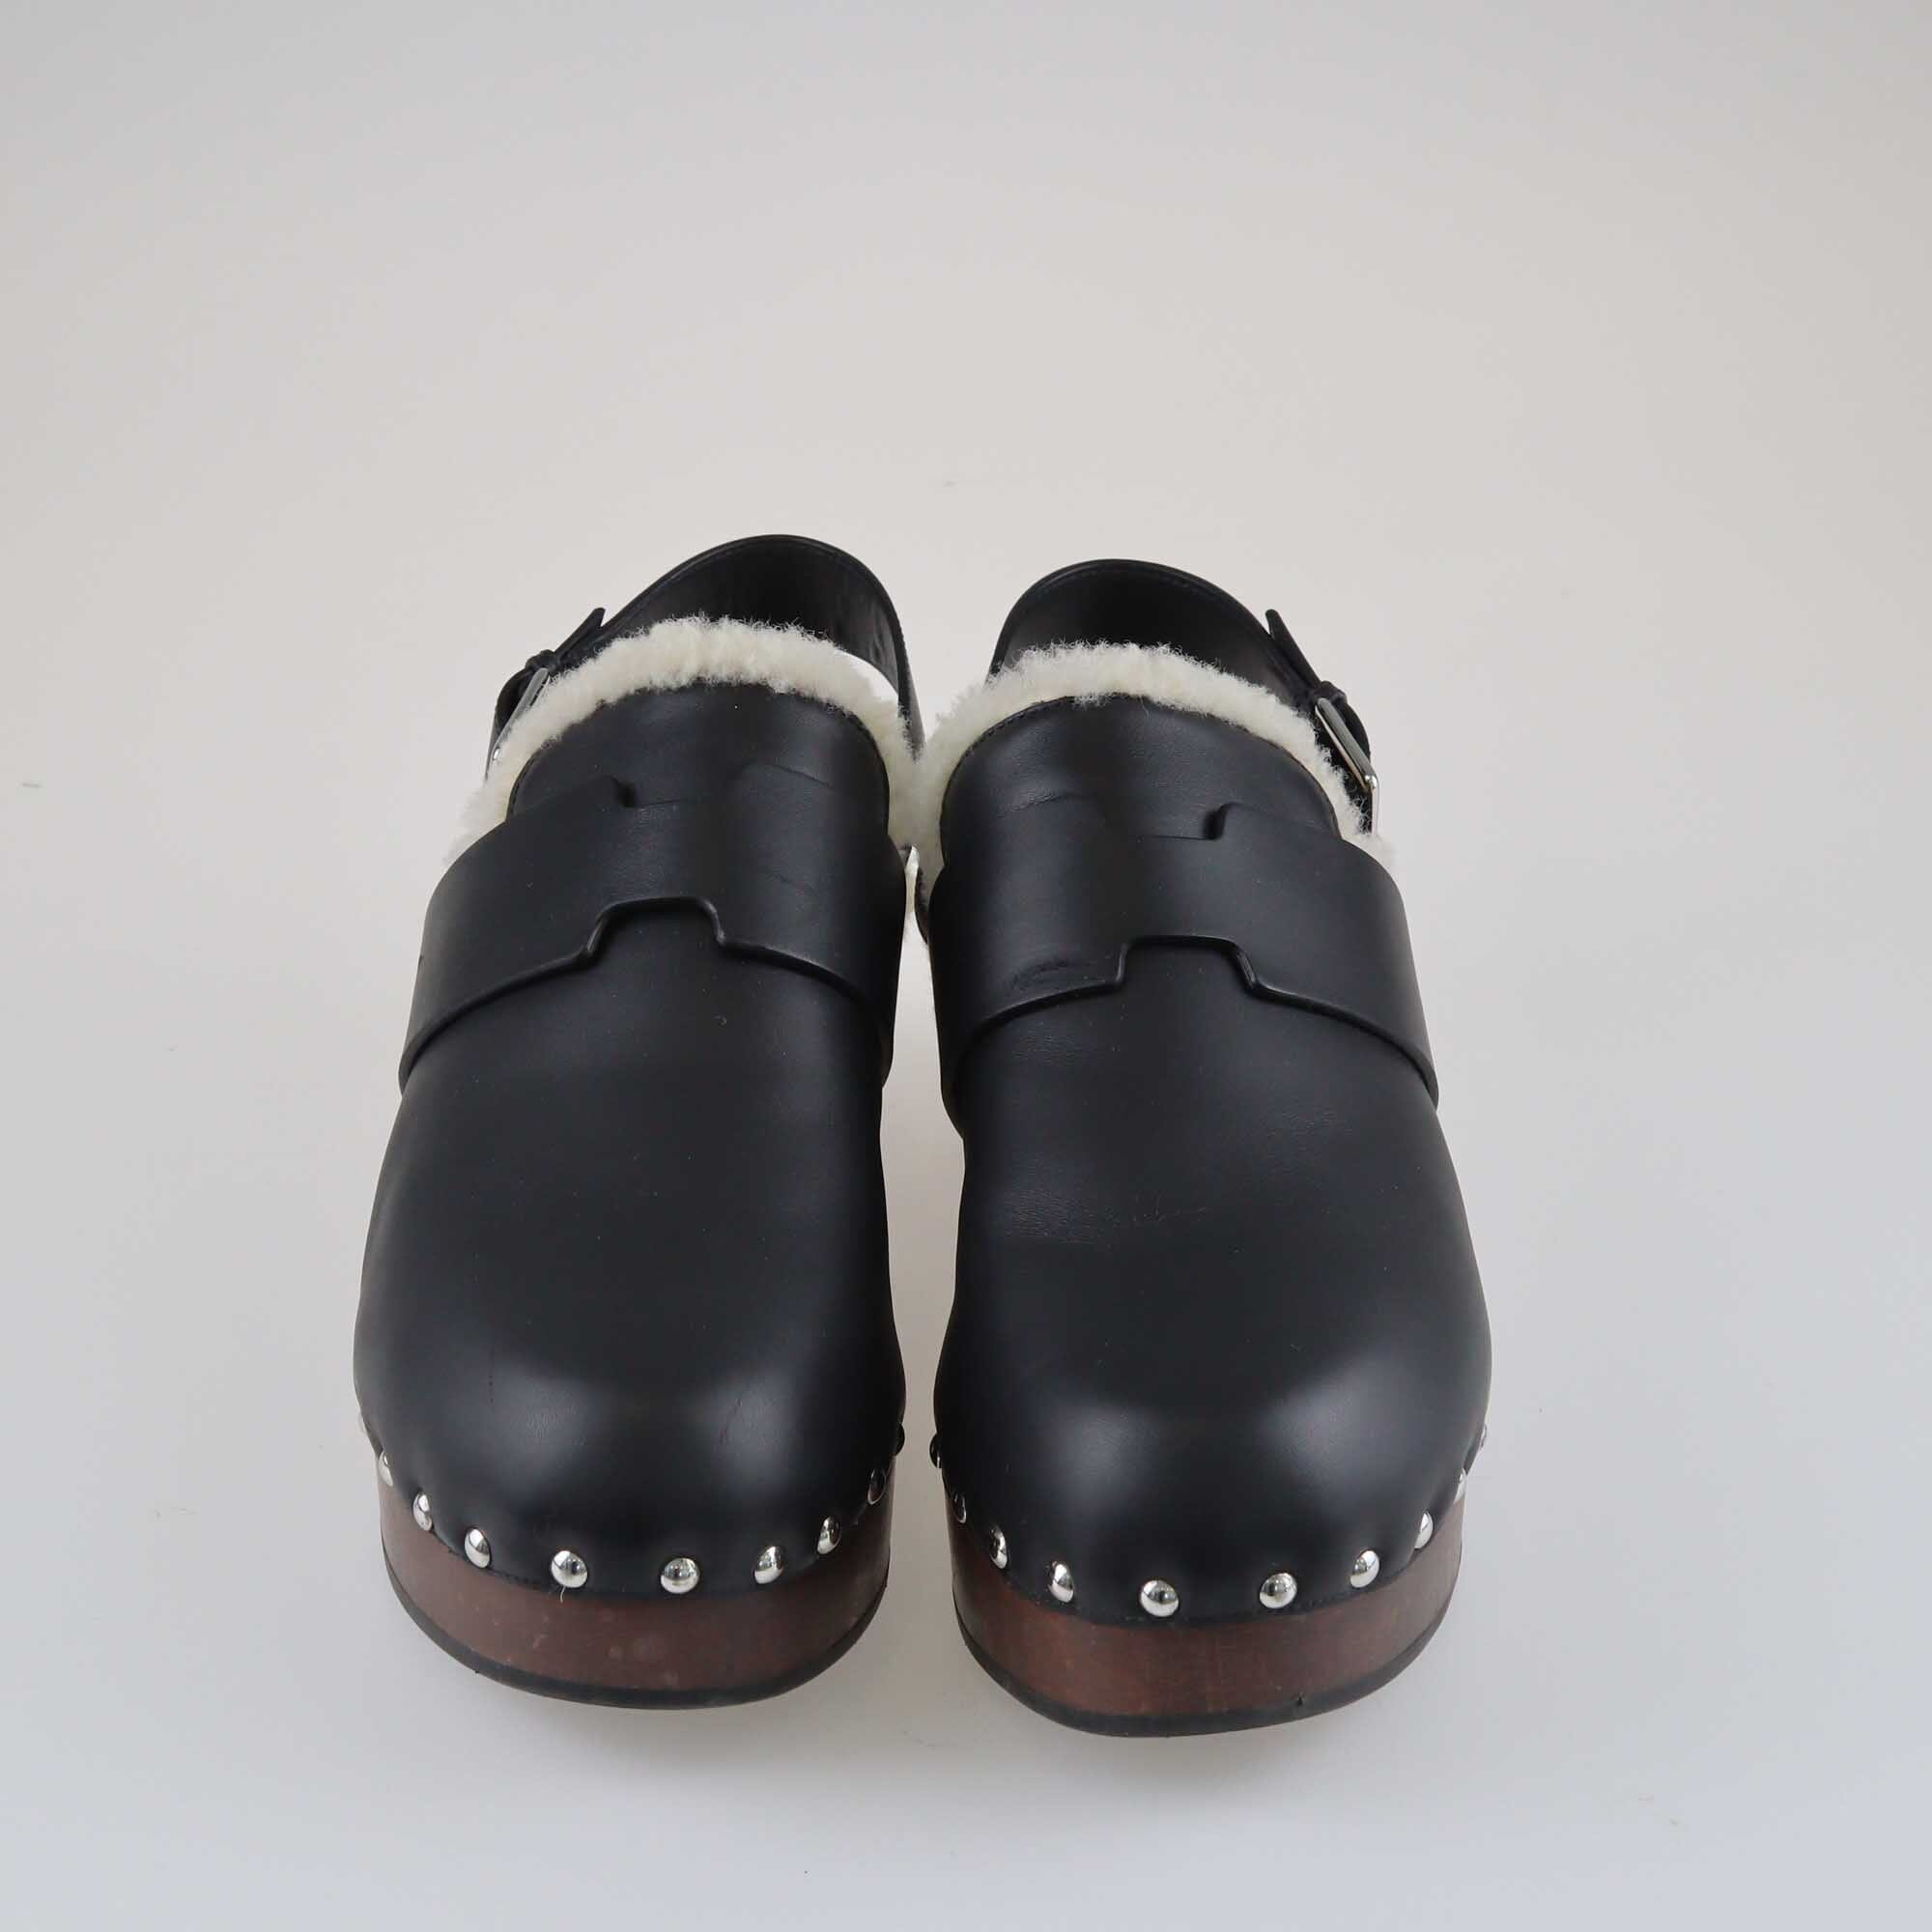 Hermes Black Leather and Shearling Hermione Mule Shoes Hermes 